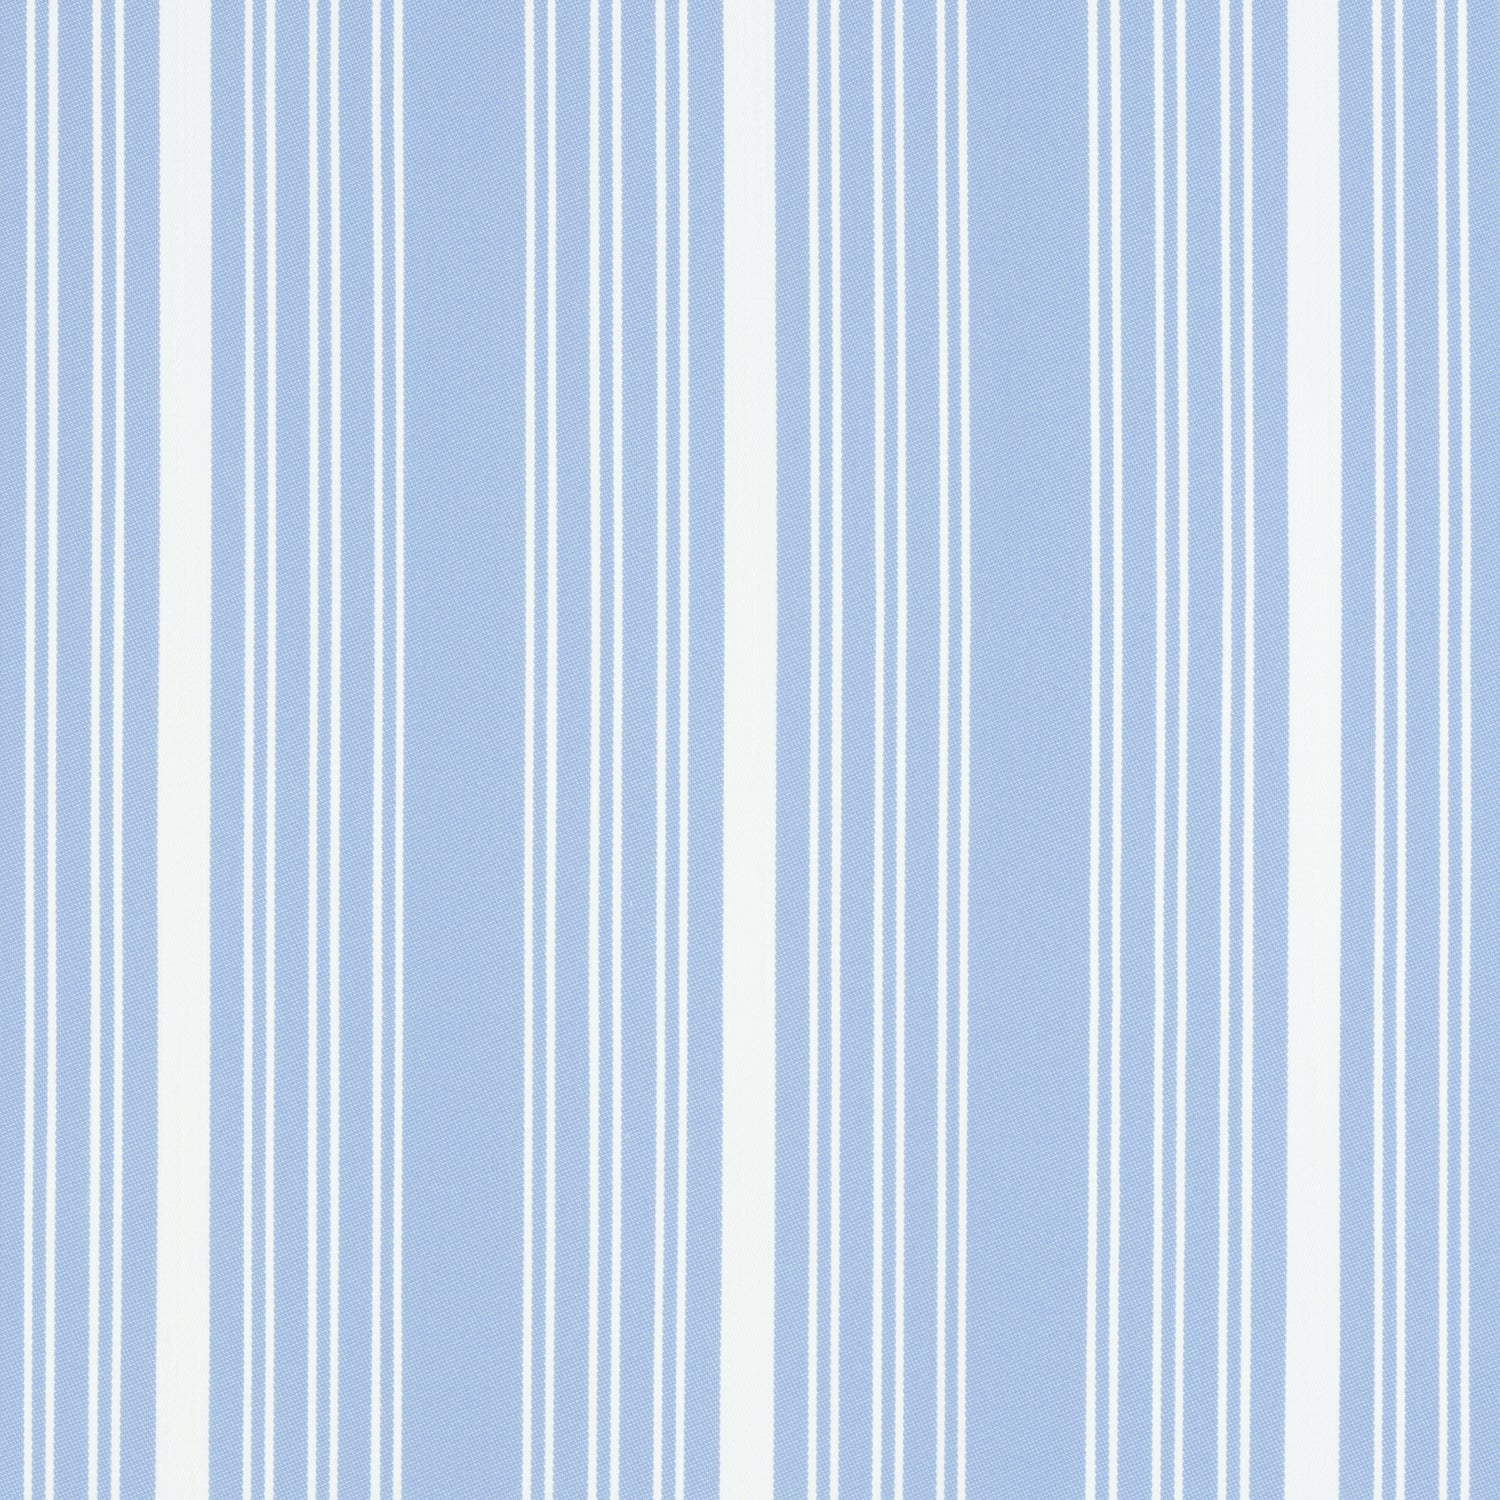 Kaia Stripe fabric in sky color - pattern number W8544 - by Thibaut in the Villa collection